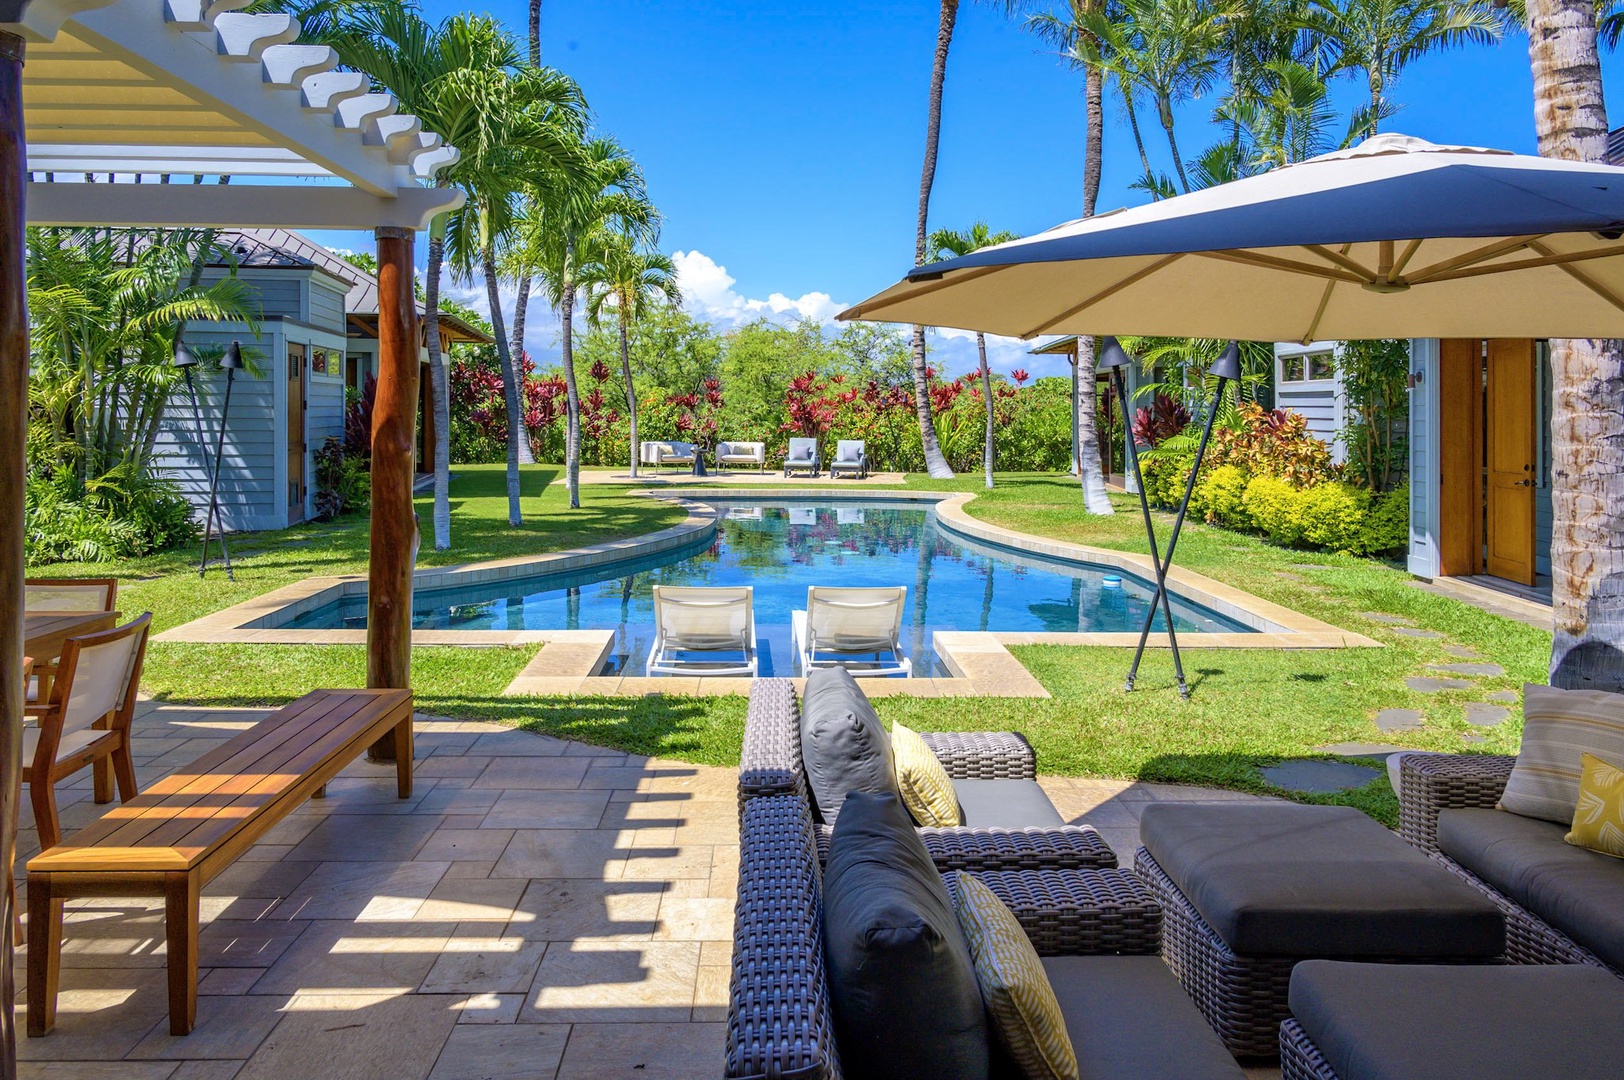 Kamuela Vacation Rentals, 3BD Na Hale 3 at Pauoa Beach Club at Mauna Lani Resort - The covered lanais by the pool offers plenty of space for the family to Gather, dine, bond and relax.